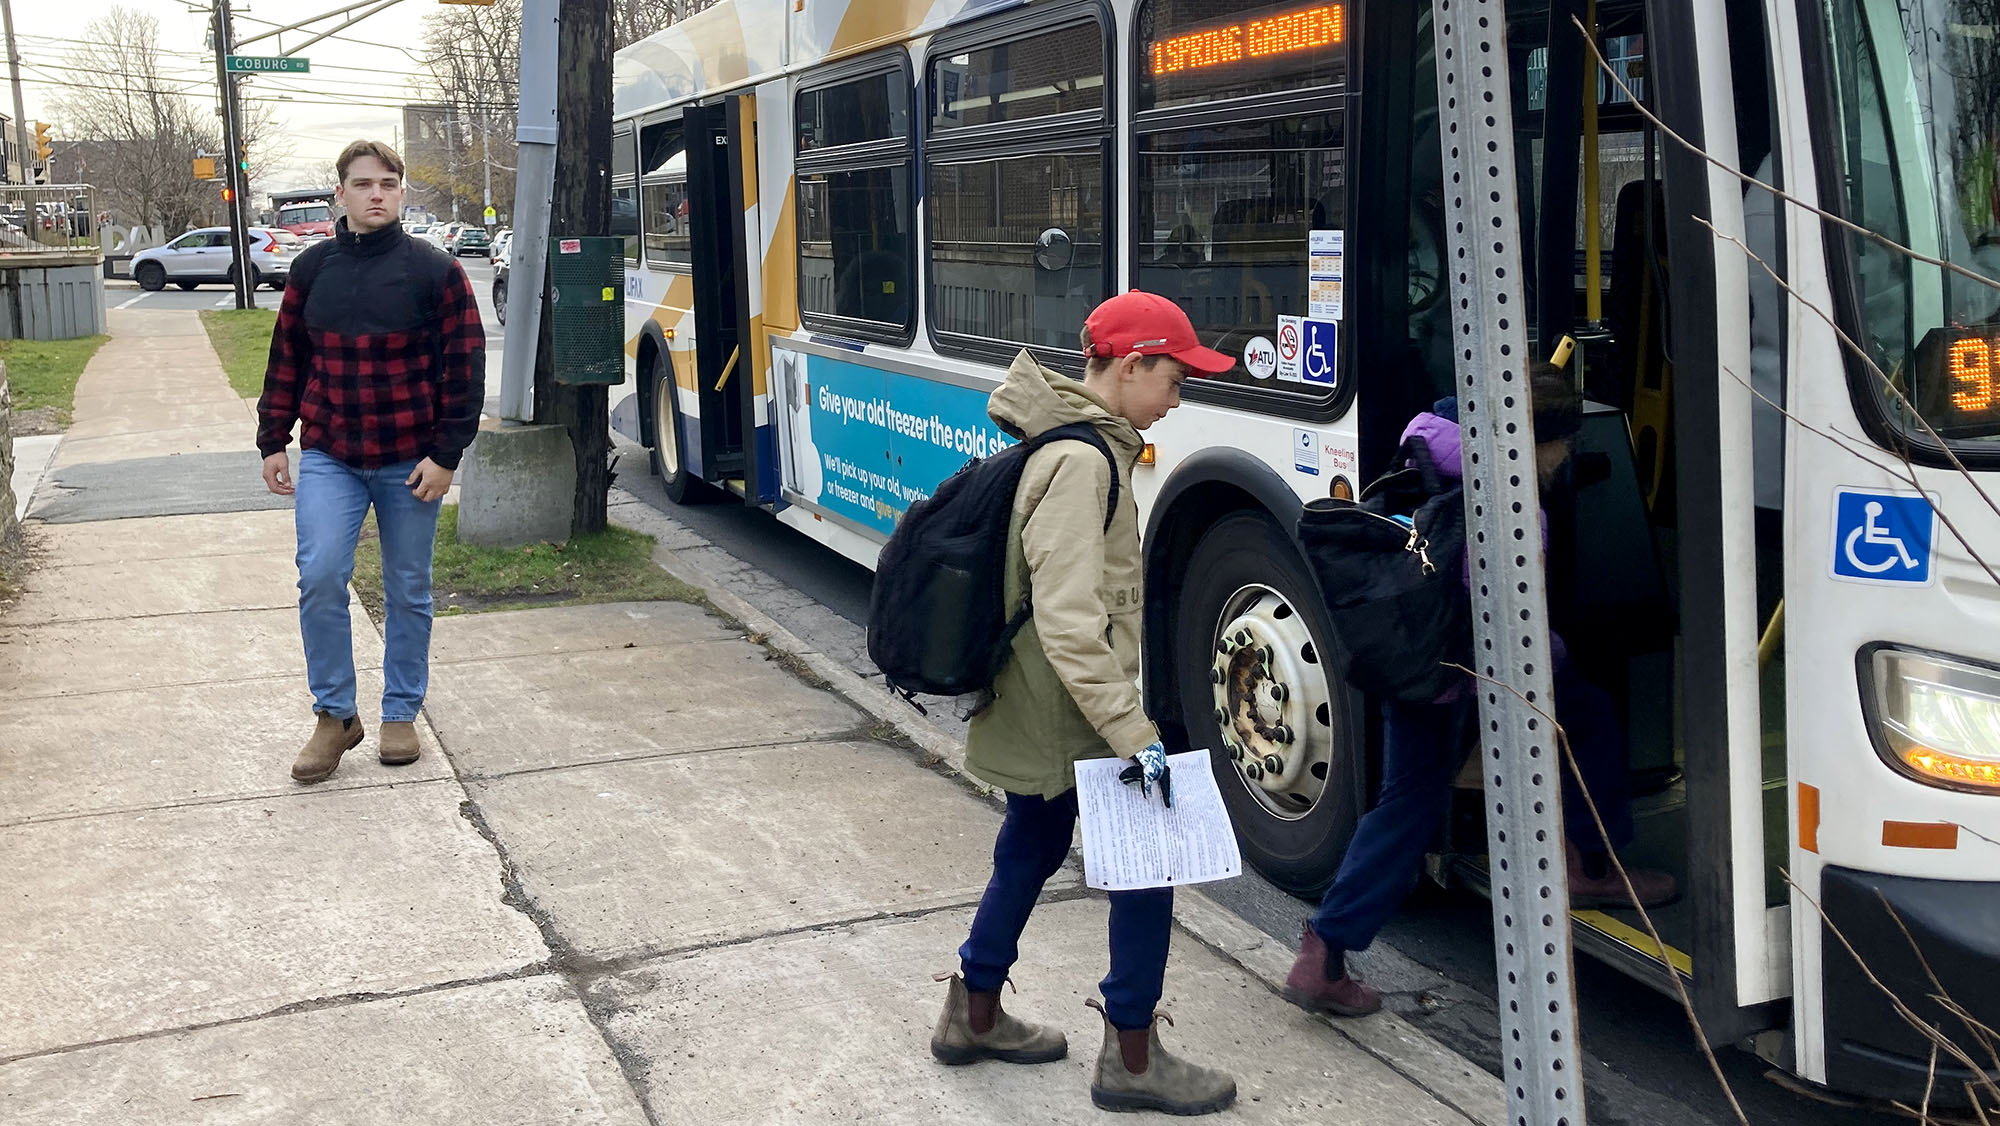 Many fewer riders are commuting to work via Halifax Transit, according to the latest census data. The number of transit commuters in Halifax was nearly cut in half between 2016 and 2021, a year into the COVID-19 pandemic.